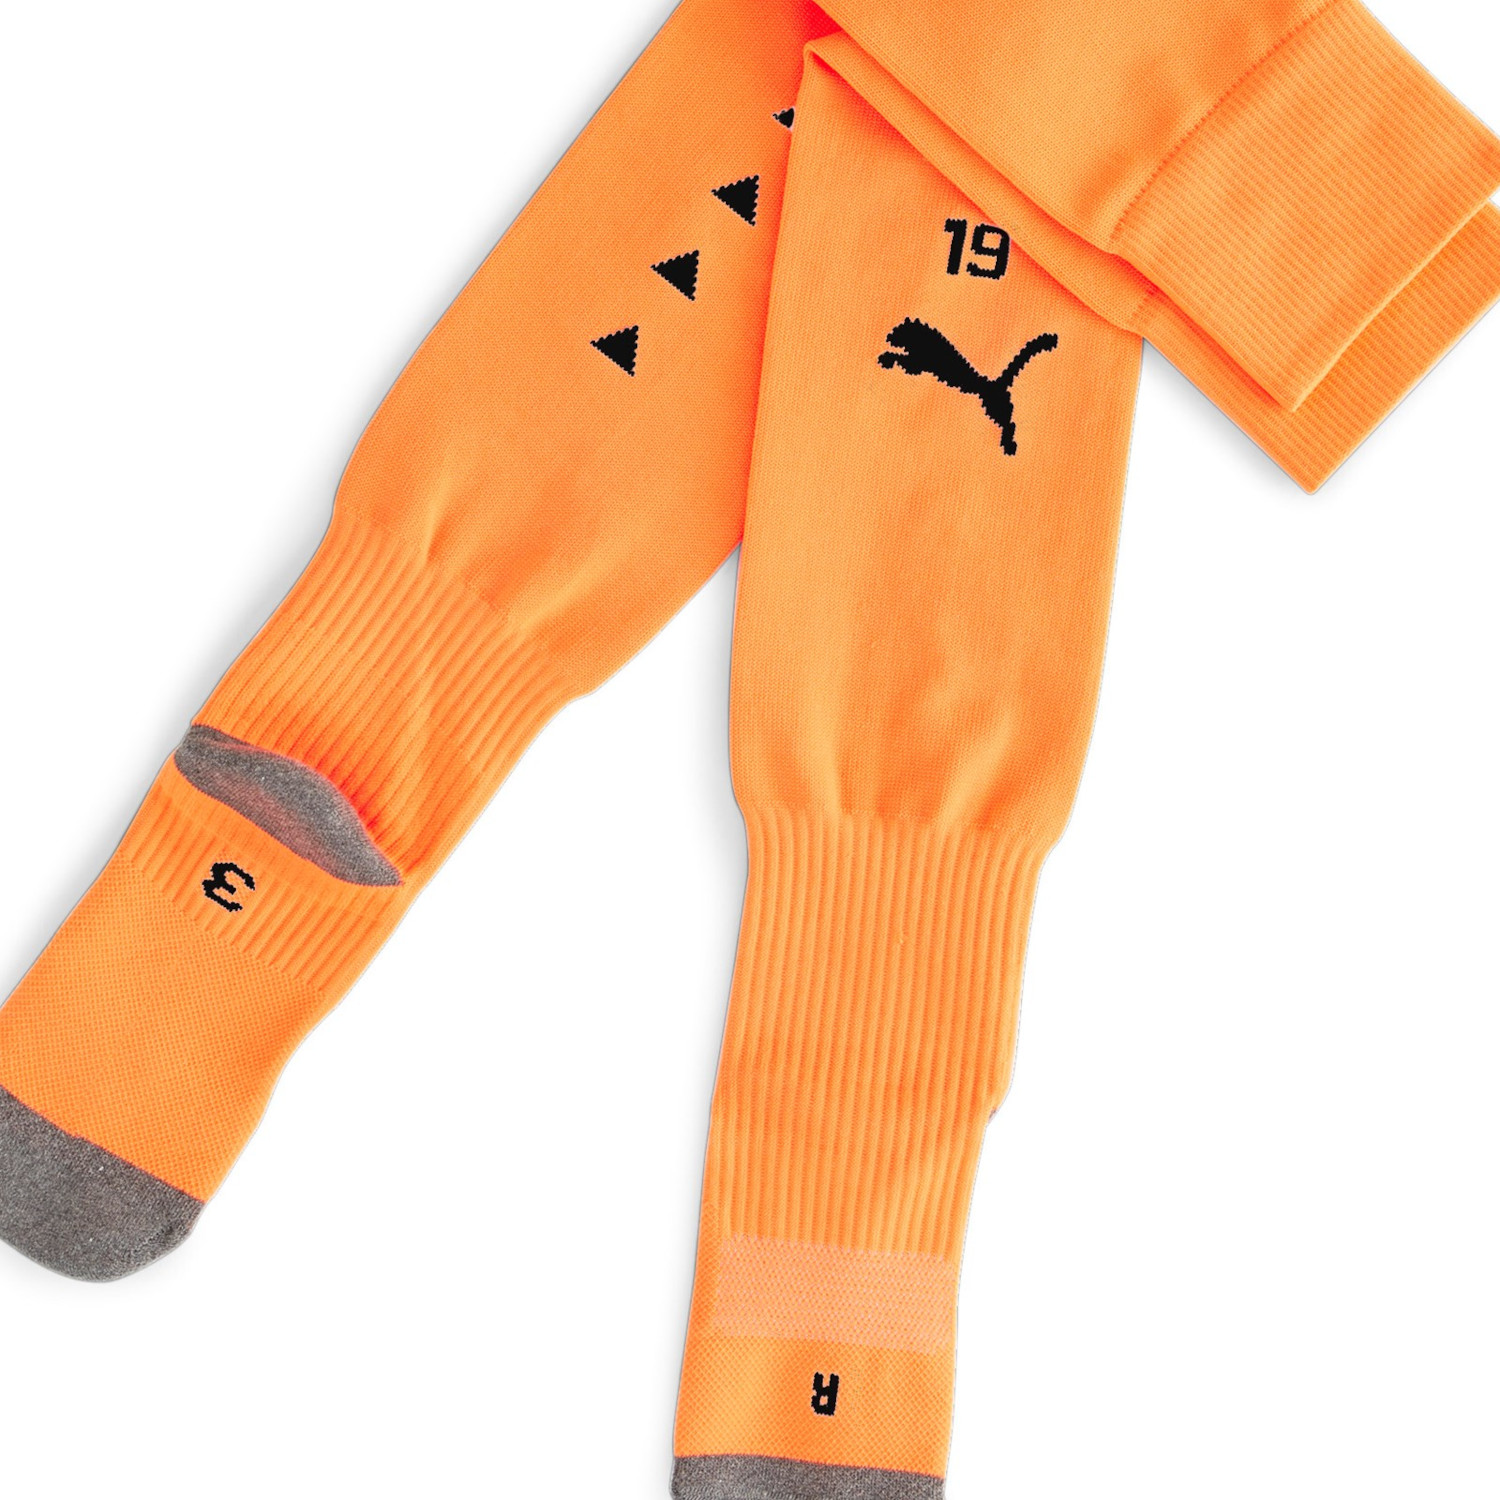 https://www.cortexpower.de/out/pictures/generated/product/1/1500_1500_75/puma-team-bvb-striped-socks-replica-ultra-orange-770642.jpg